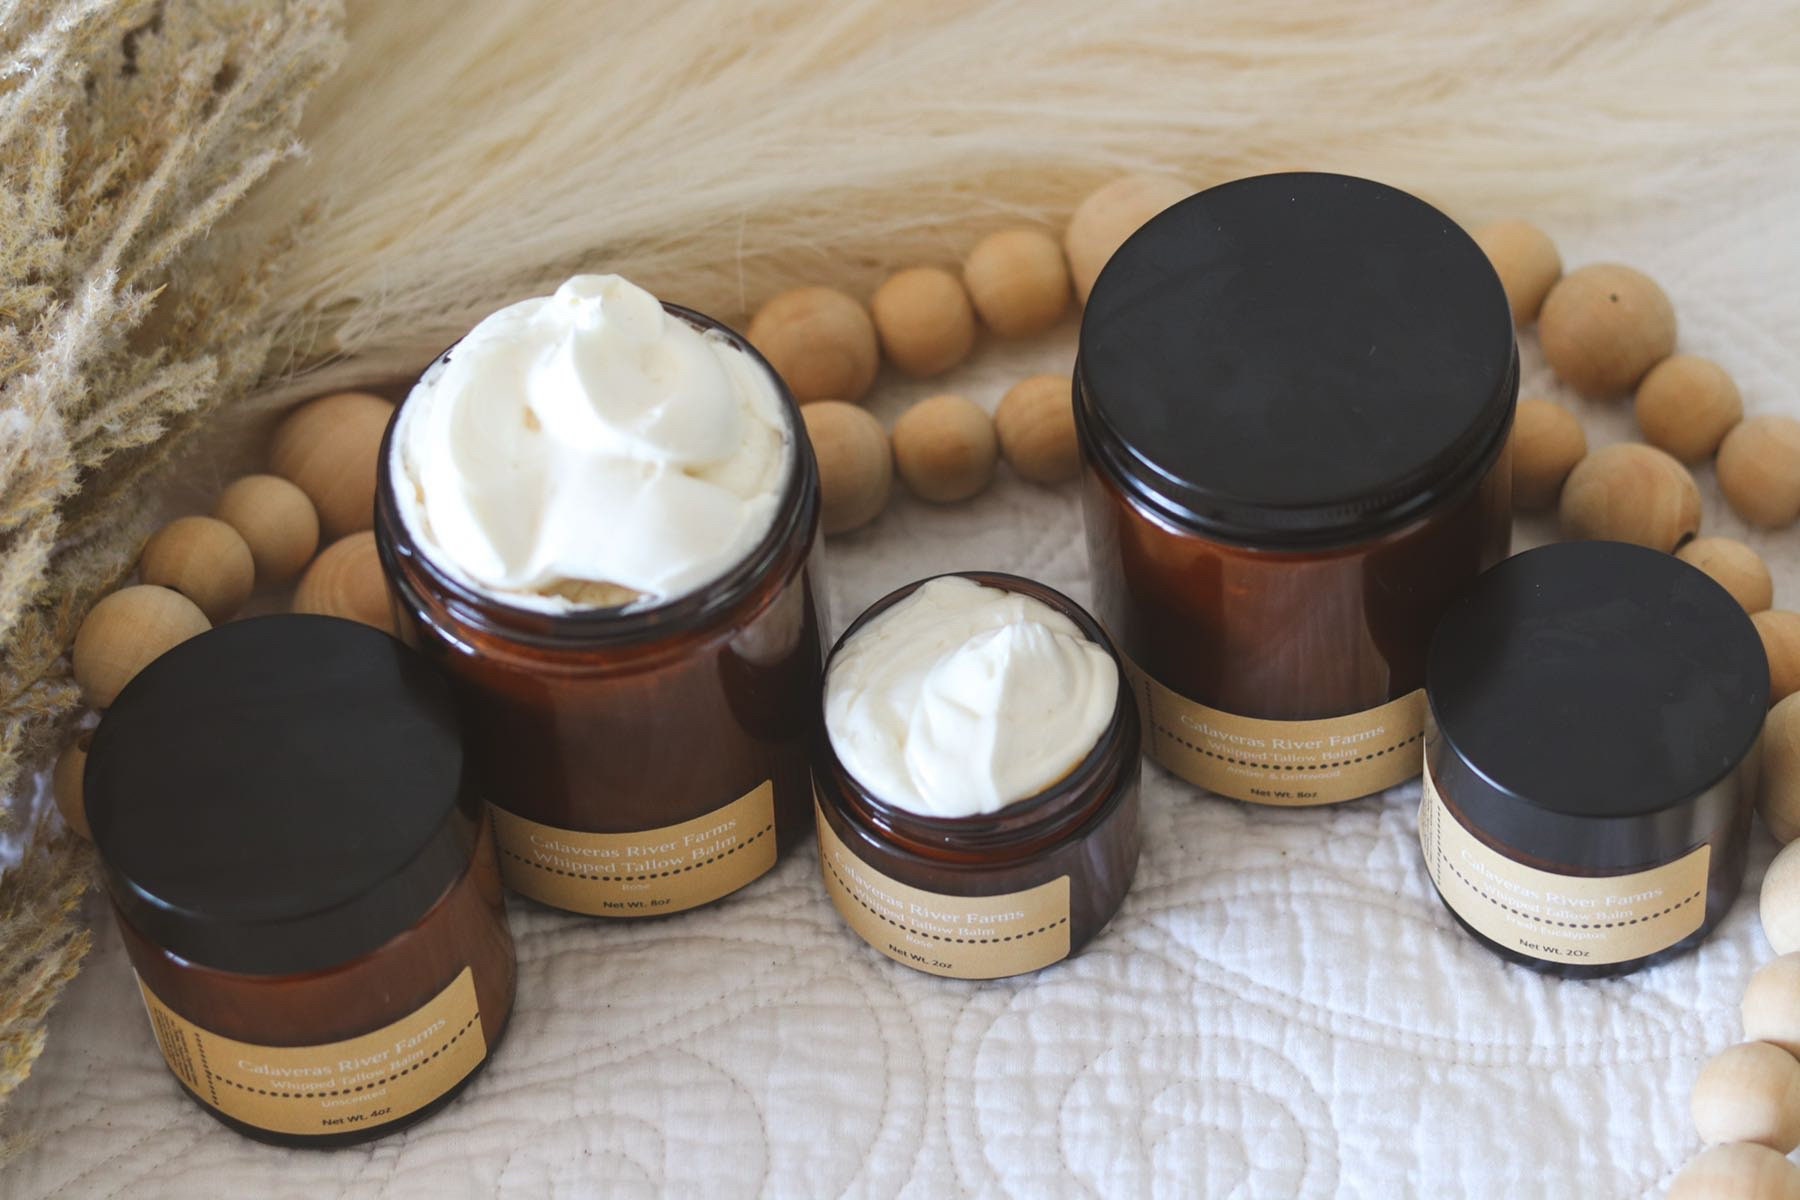 Whipped Tallow Balm with Honey and Shea - Through the Wildwood